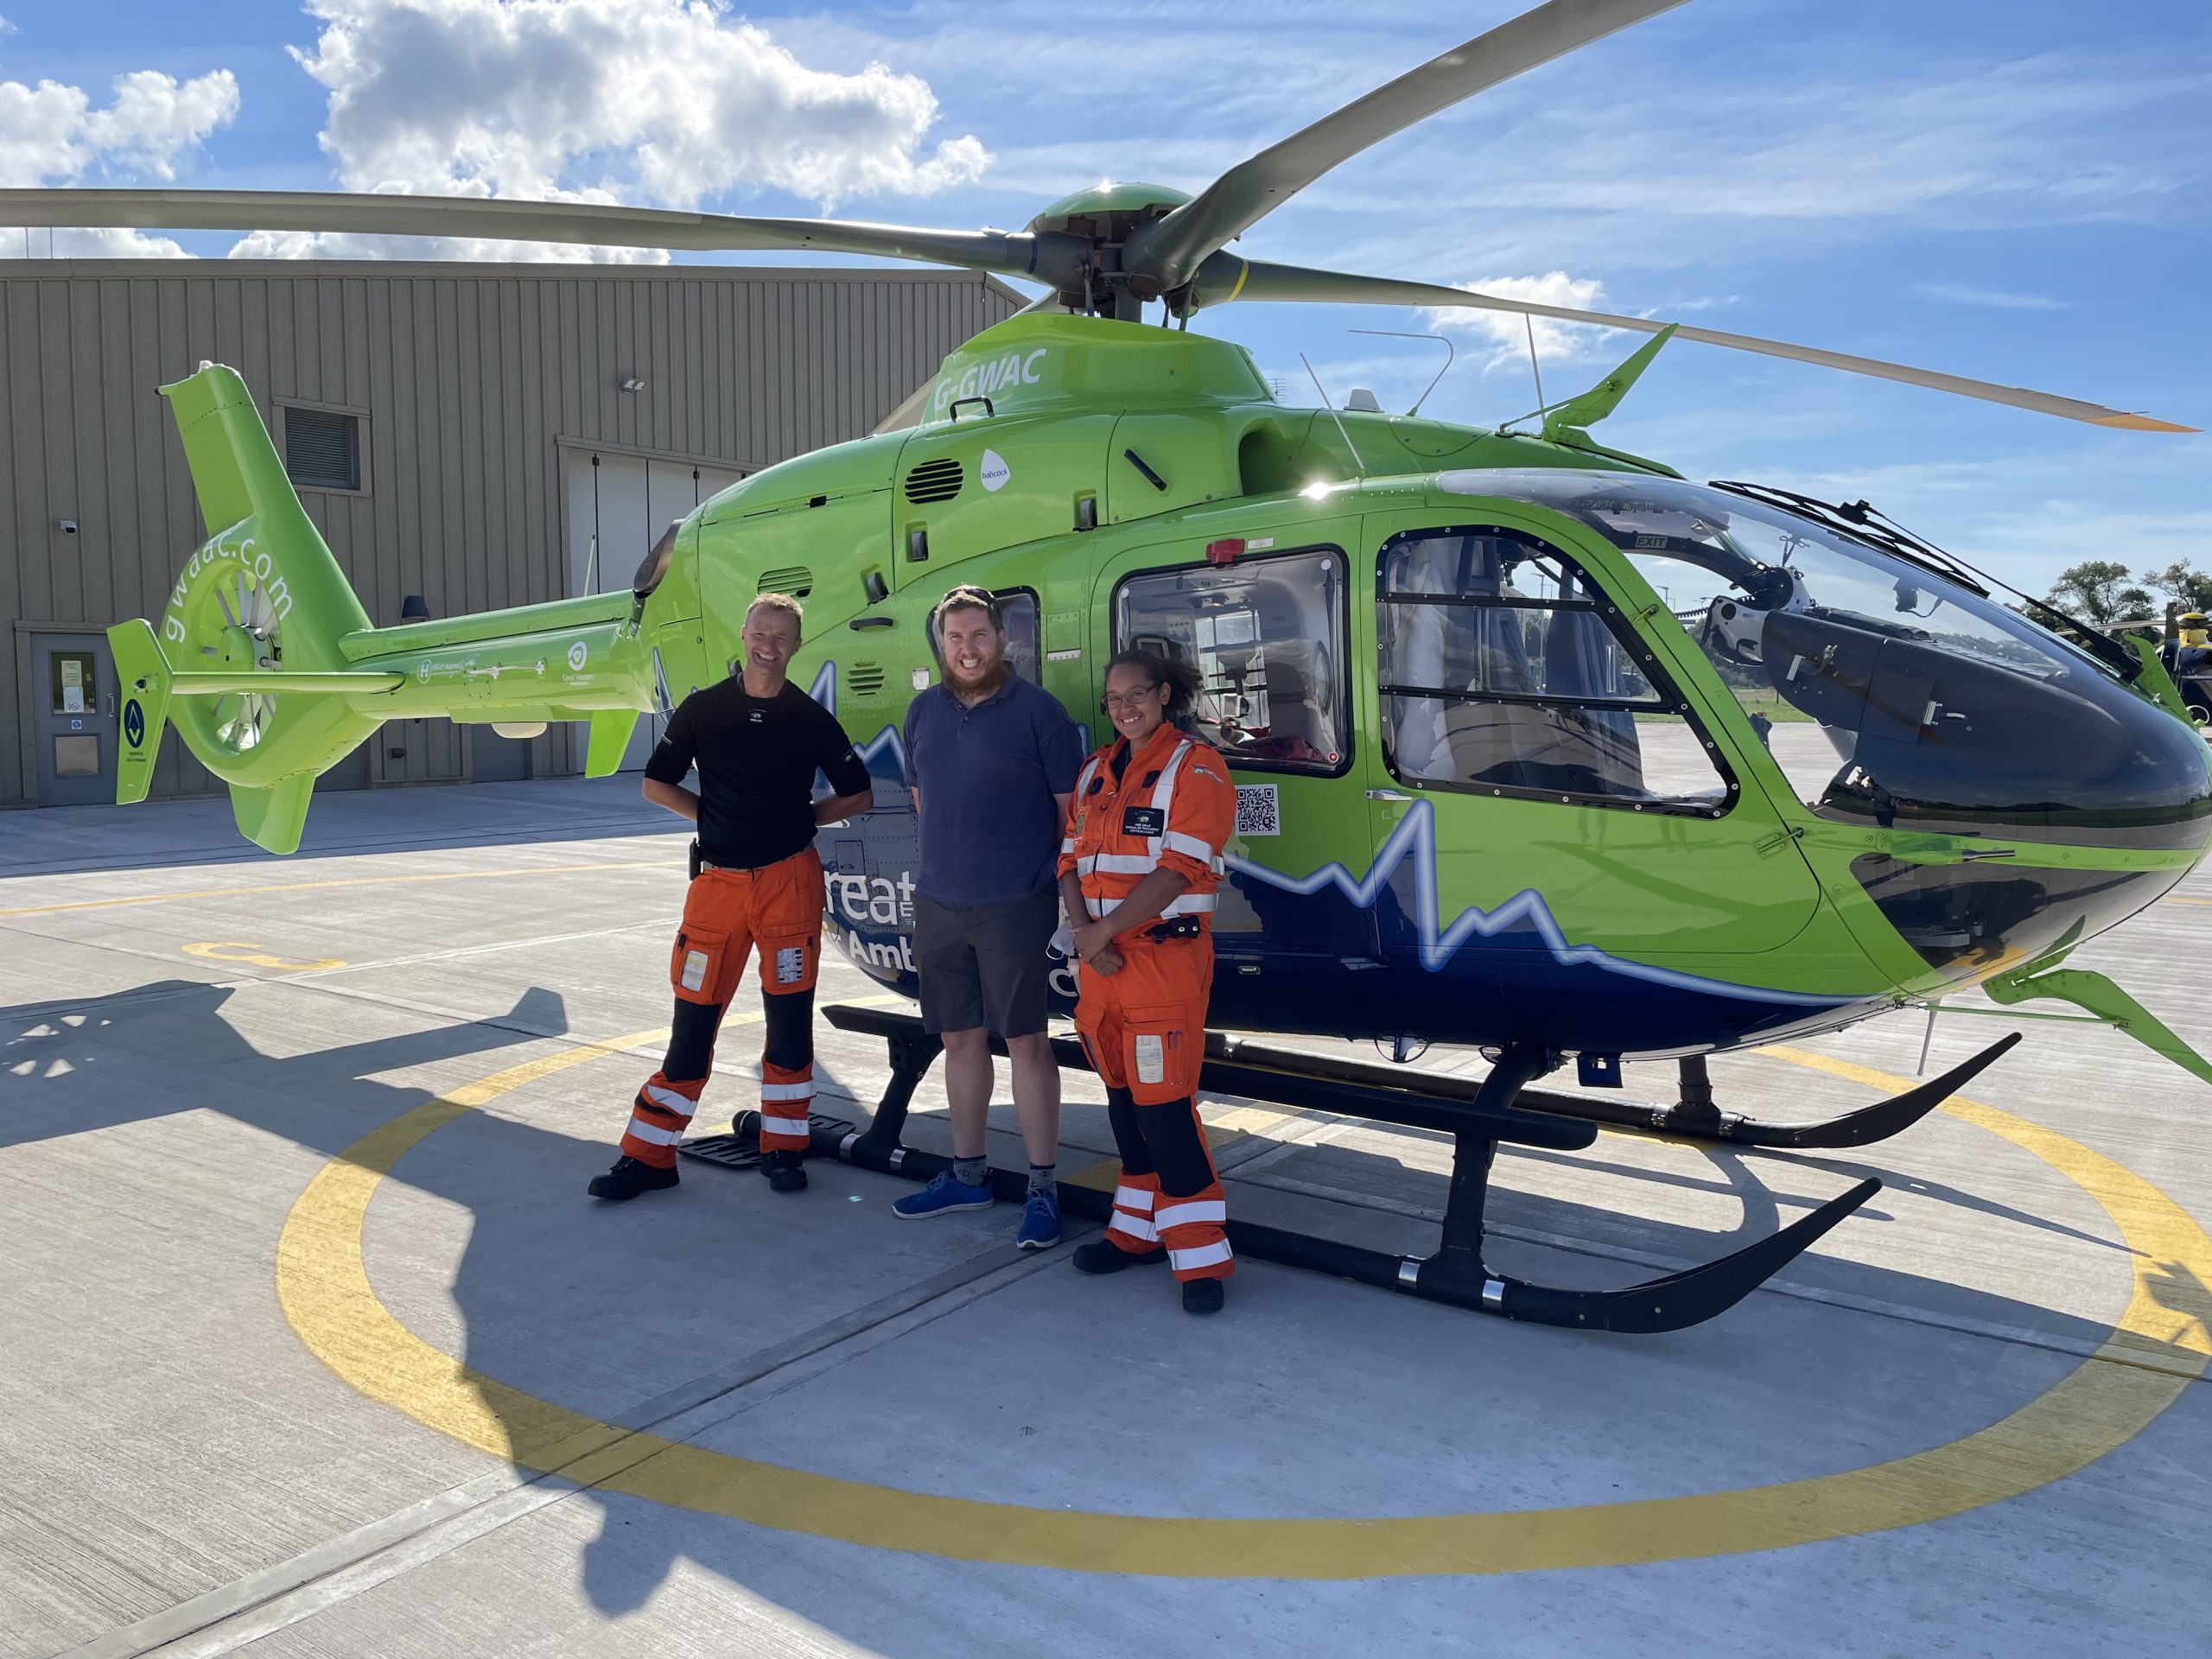 Chris and two paramedics stand in front of the GWAAC lime green helicopter on a bright sunny day.